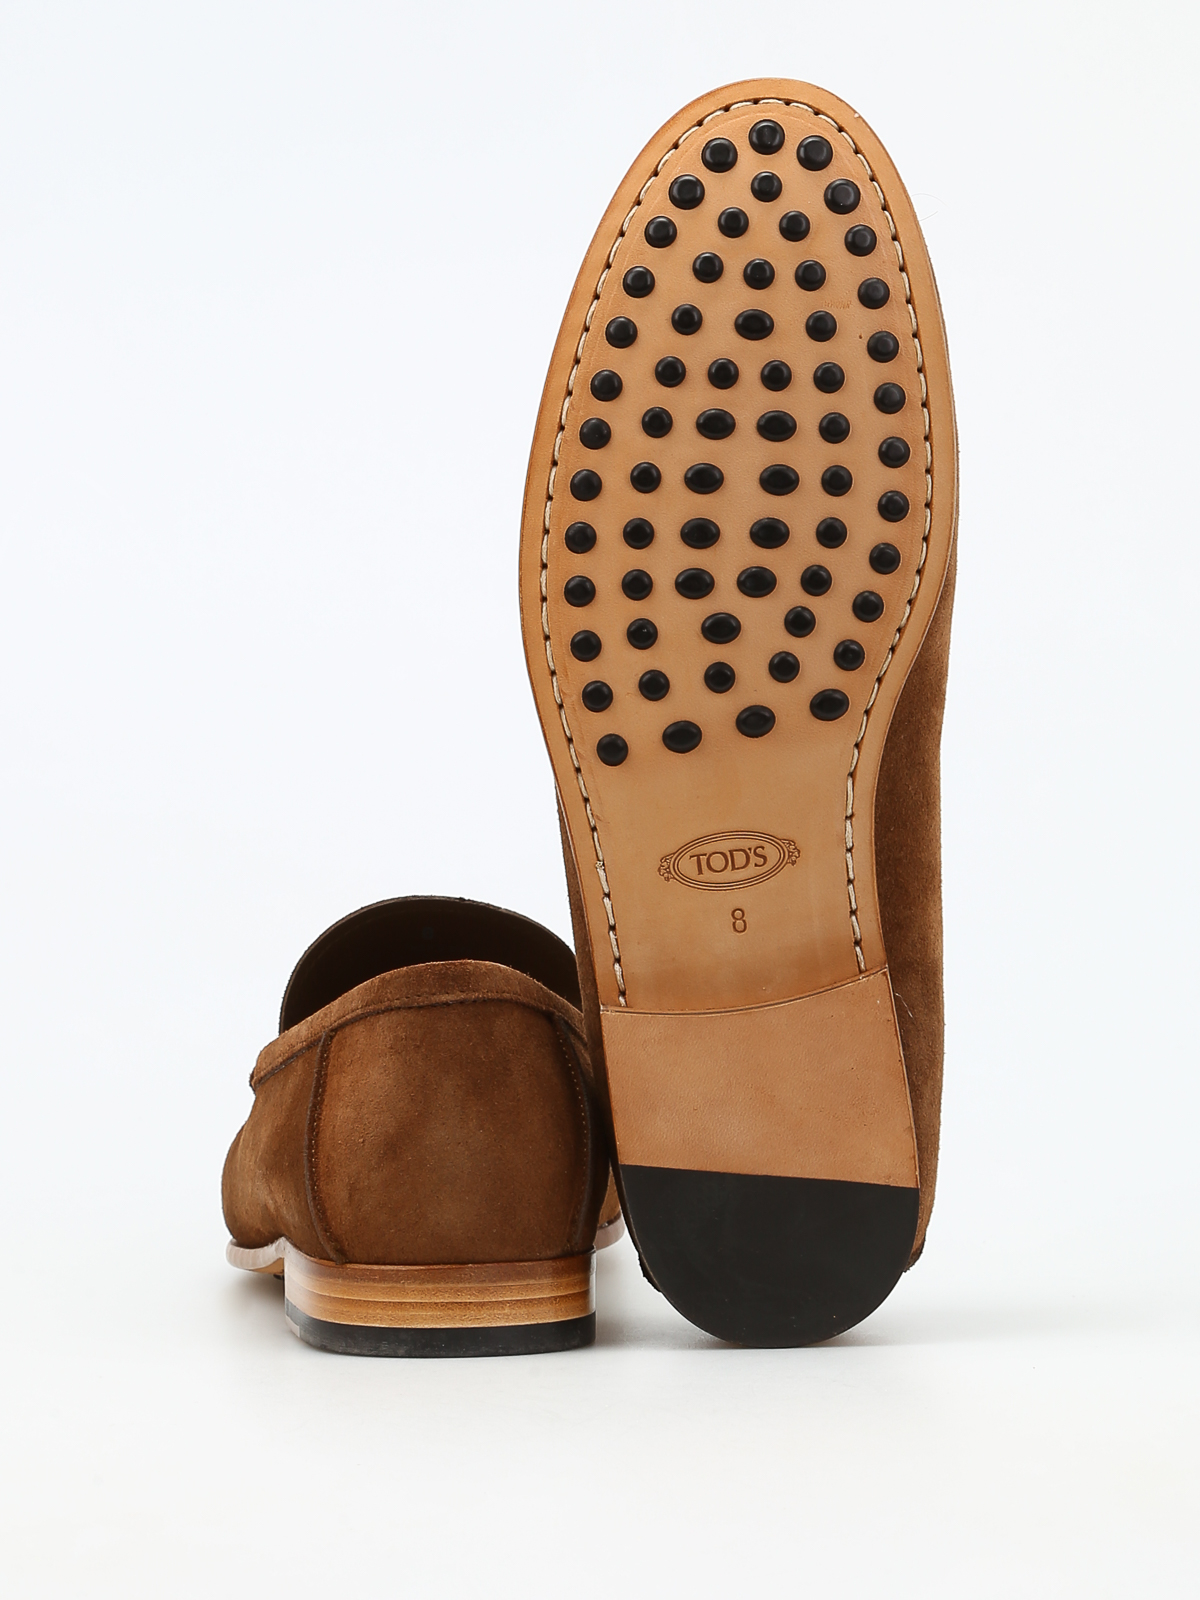 tods sole